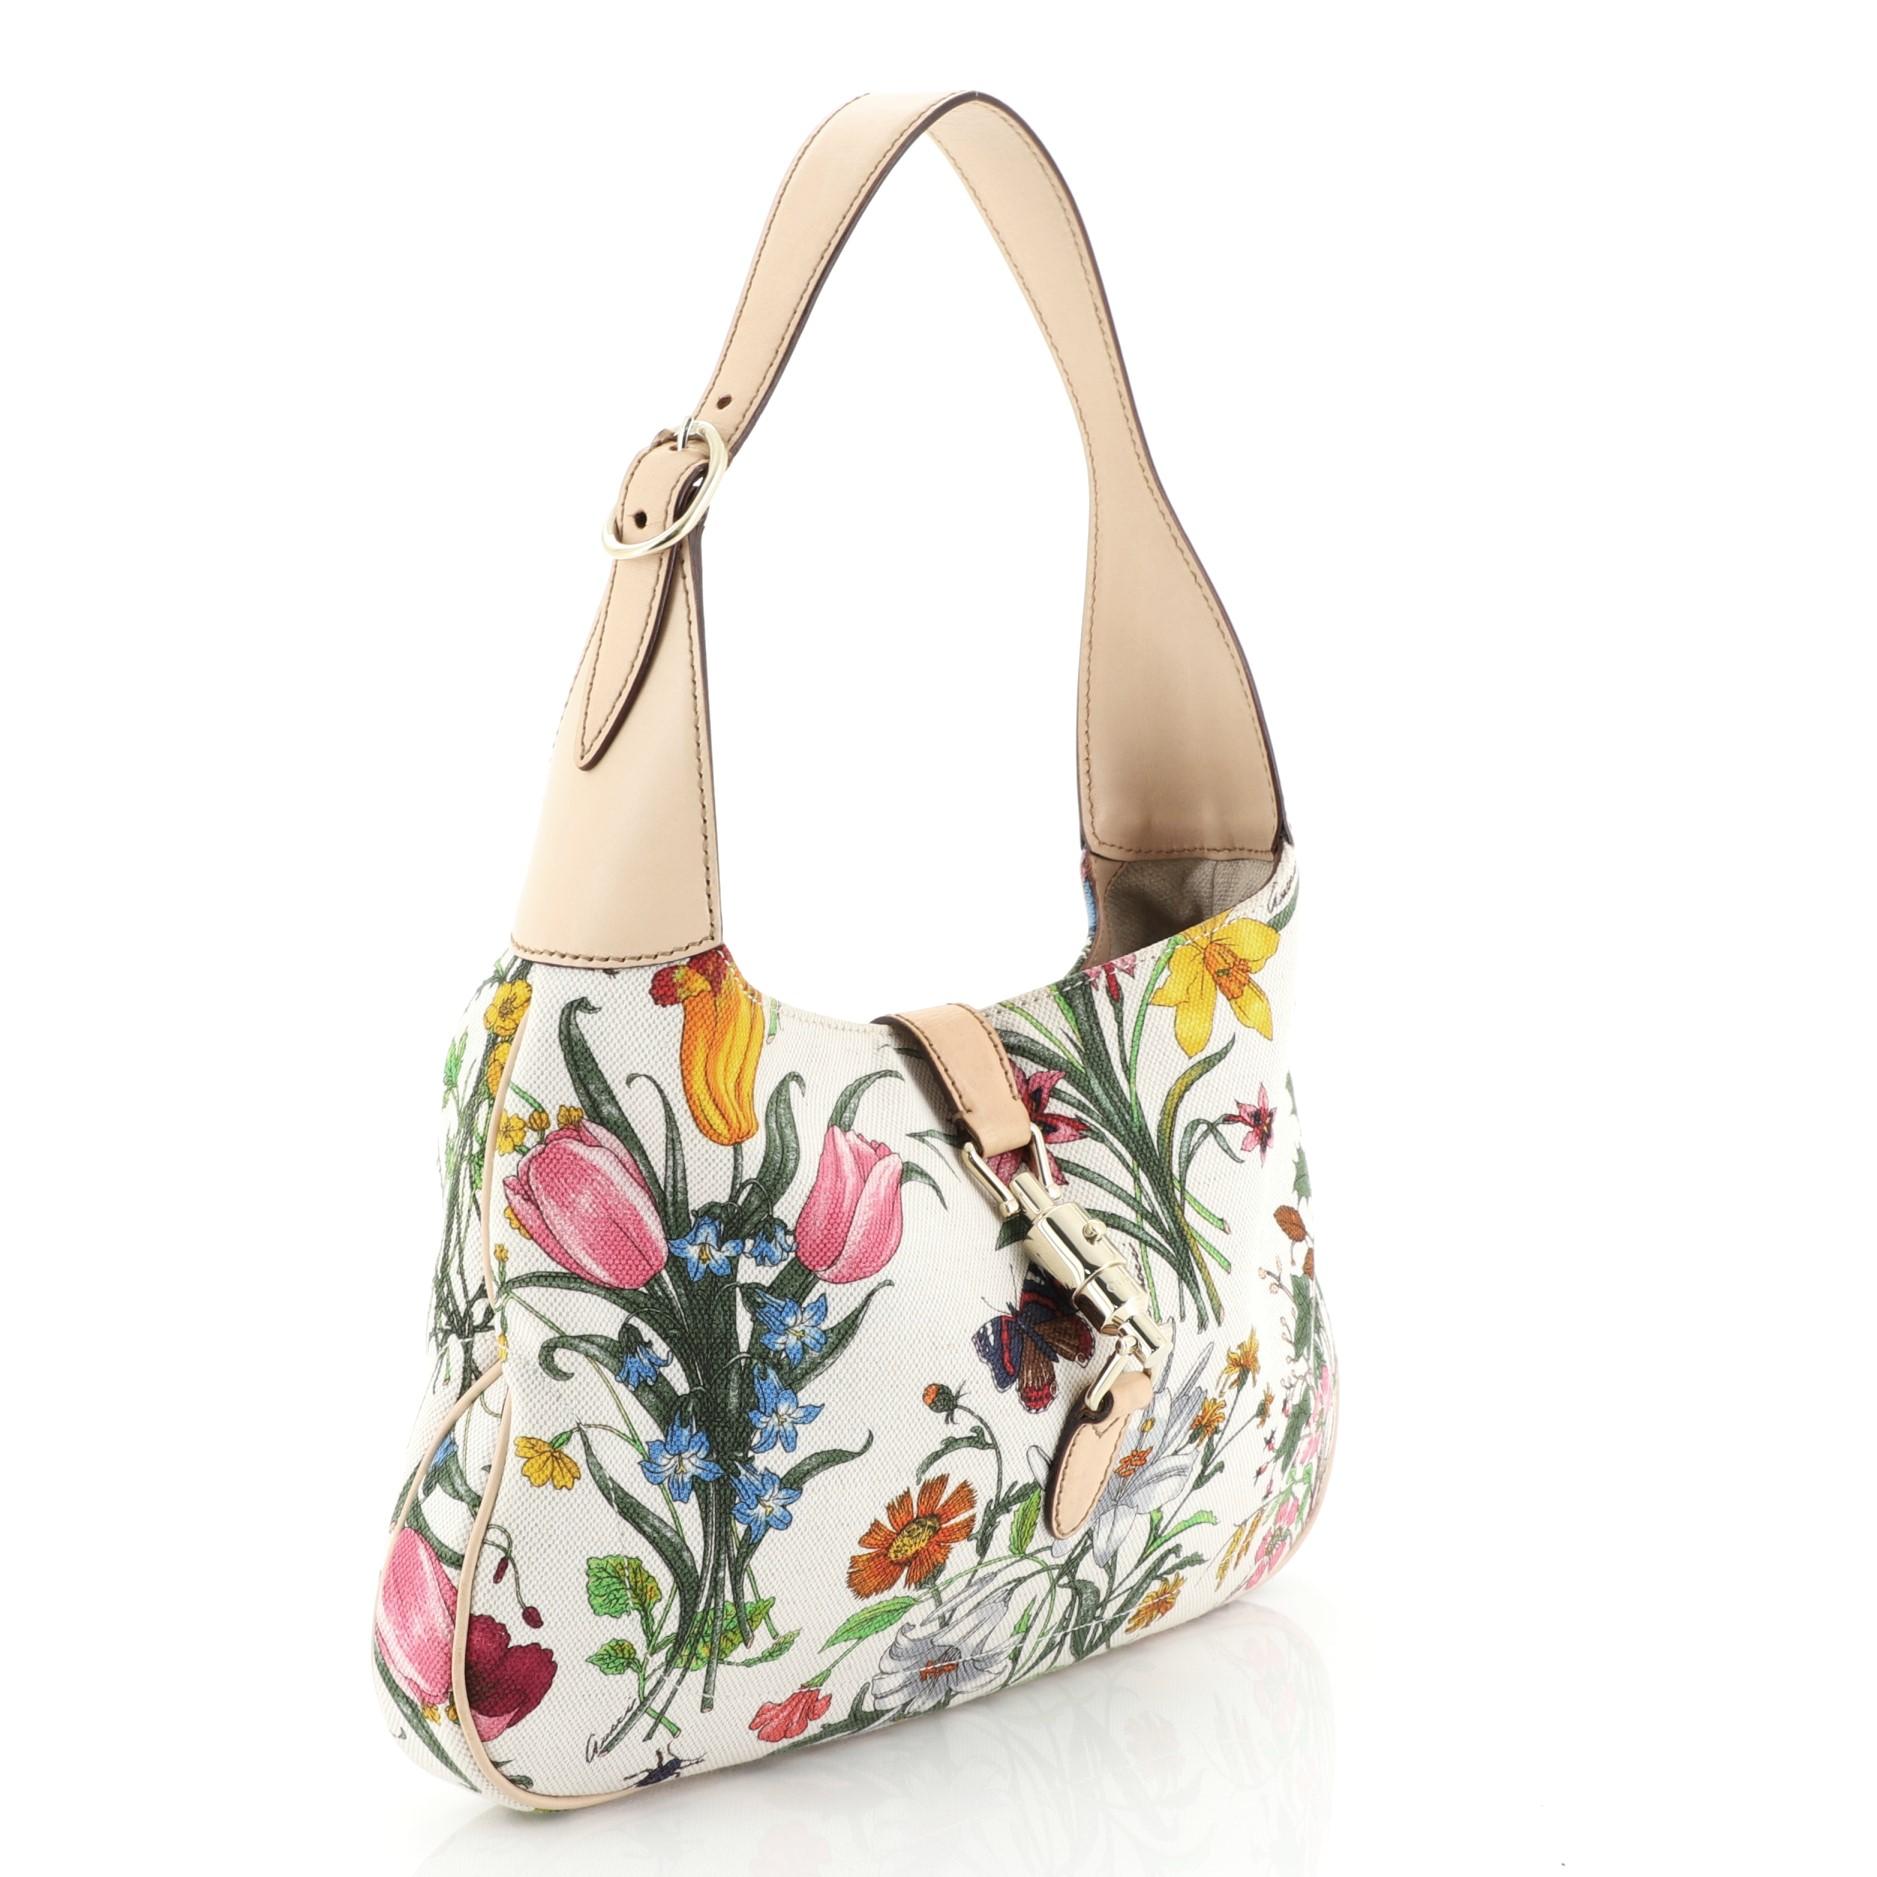 This Gucci Jackie O Bag Flora Canvas Small, crafted from multicolor flora canvas, features an adjustable shoulder strap and gold-tone hardware. Its piston lock closure opens to a beige fabric interior with side zip pocket.

Estimated Retail Price: